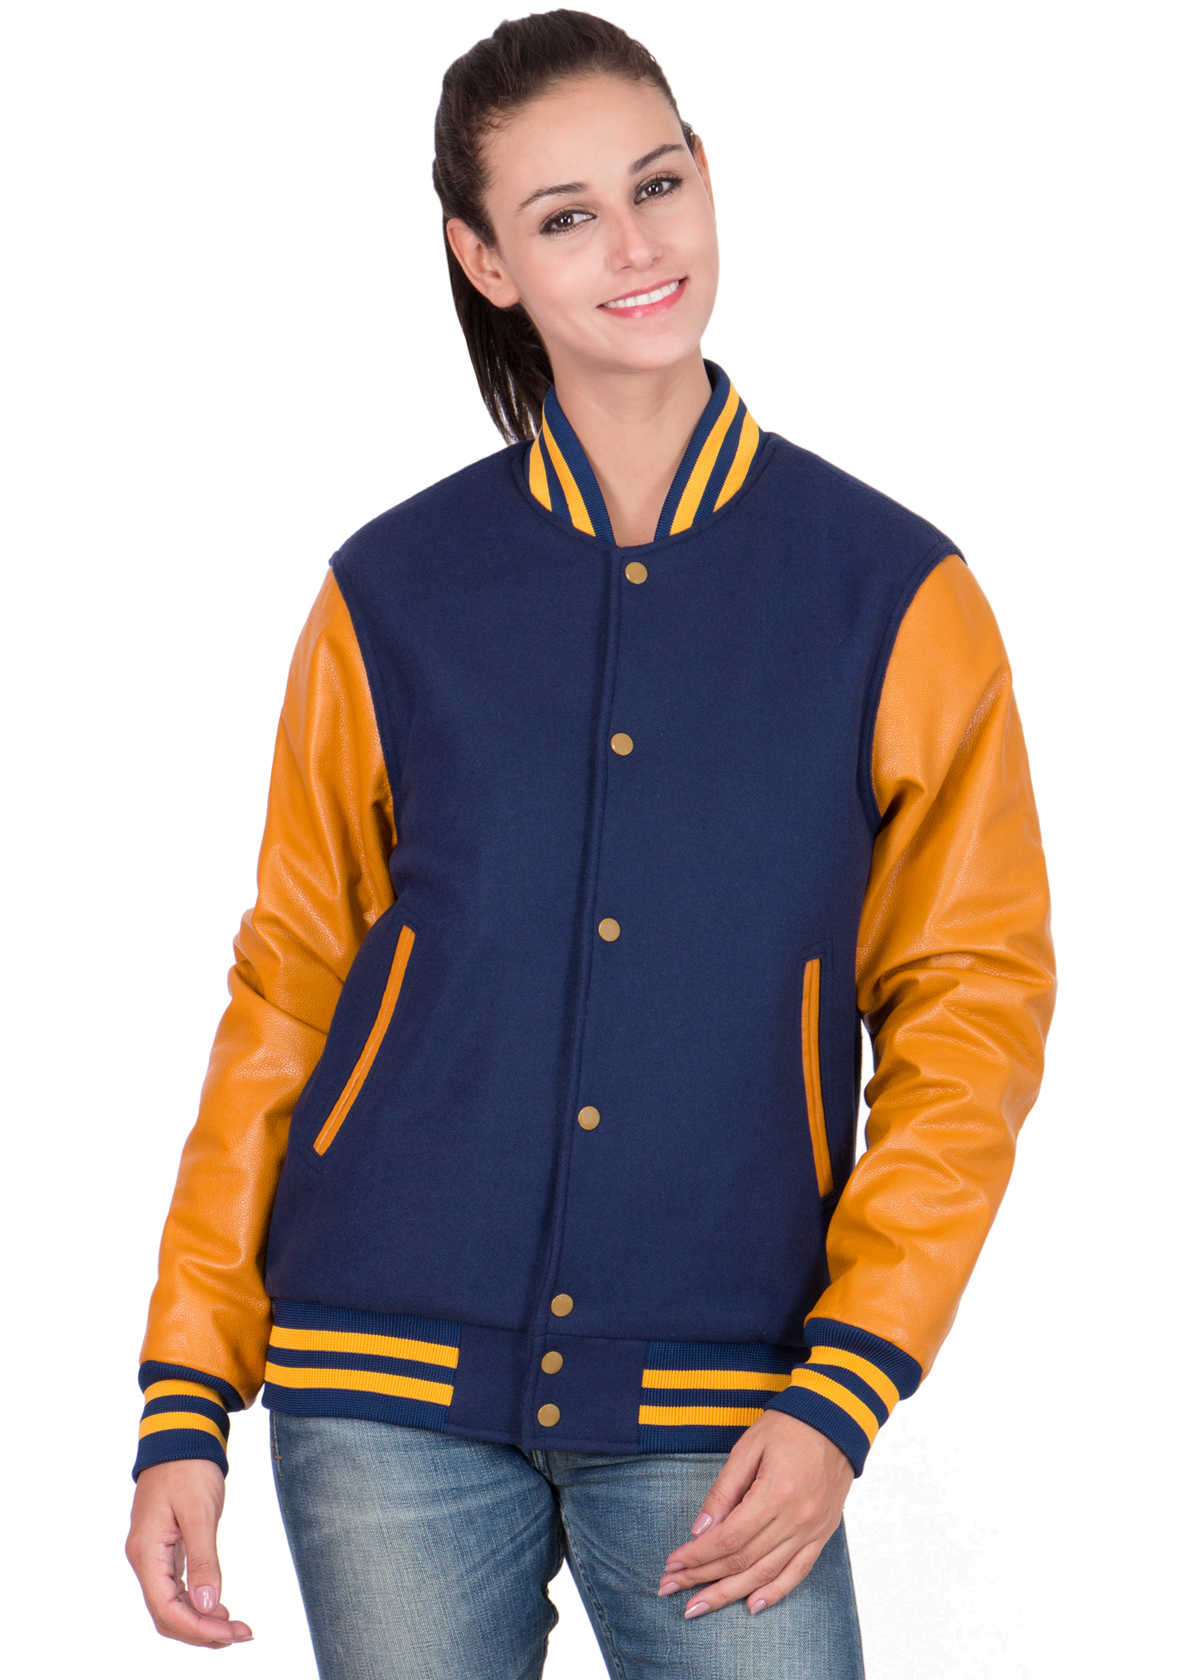 Black Wool Body & Bright Gold Leather Sleeves Letterman Jacket